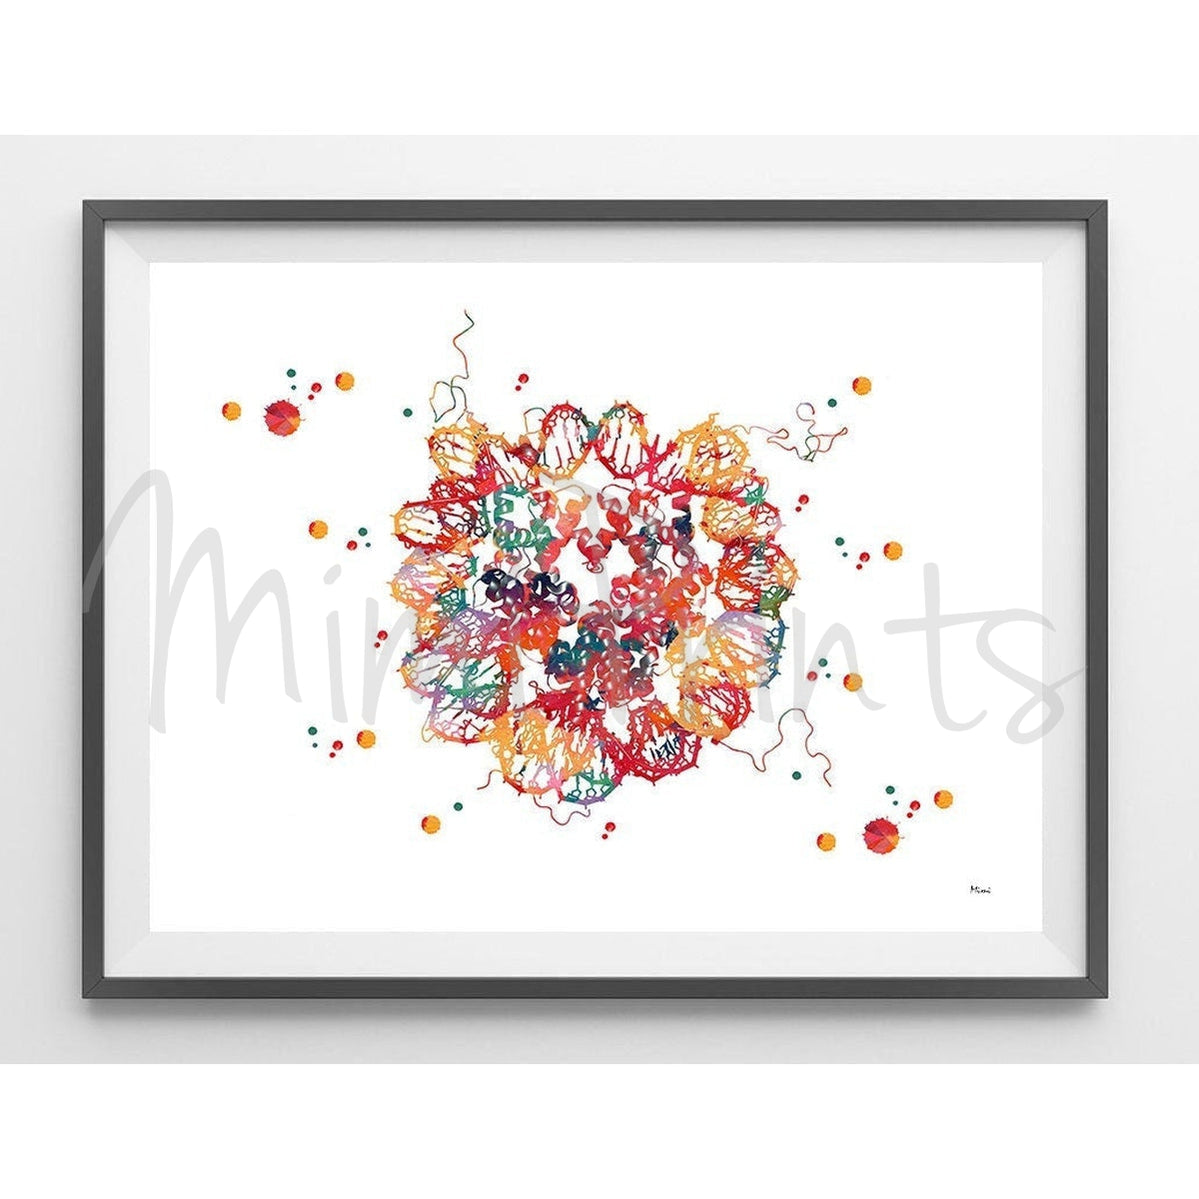 DNA Nucleosome Science Print Crystal Structure of Nucleosome Core Watercolor Genetics Art Poster